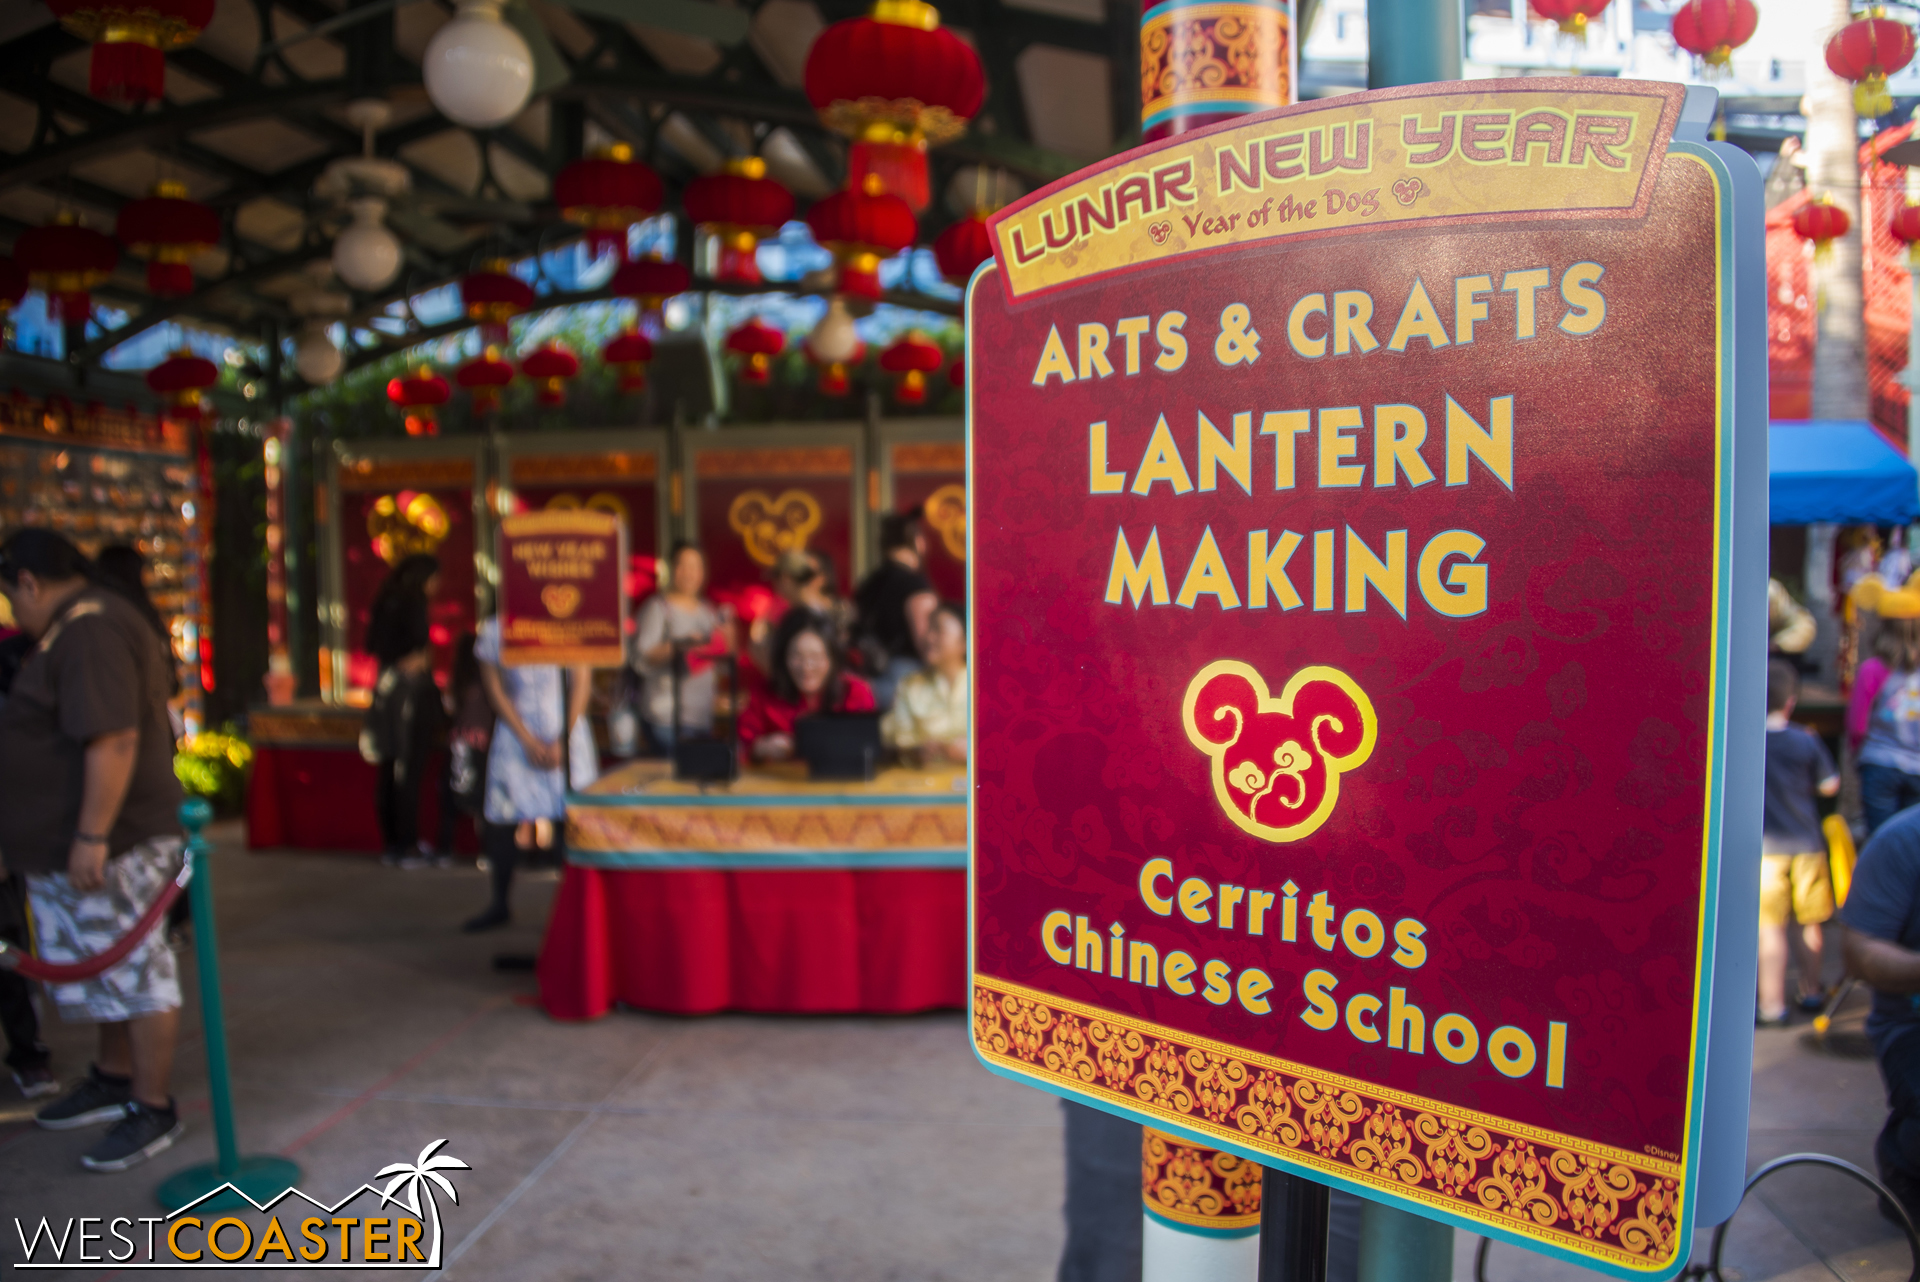  Cerritos Chinese School offers some Chinese arts and crafts.&nbsp; Kind of cool to see the place where I went to Chinese school for a few years as a kid make a feature here. 